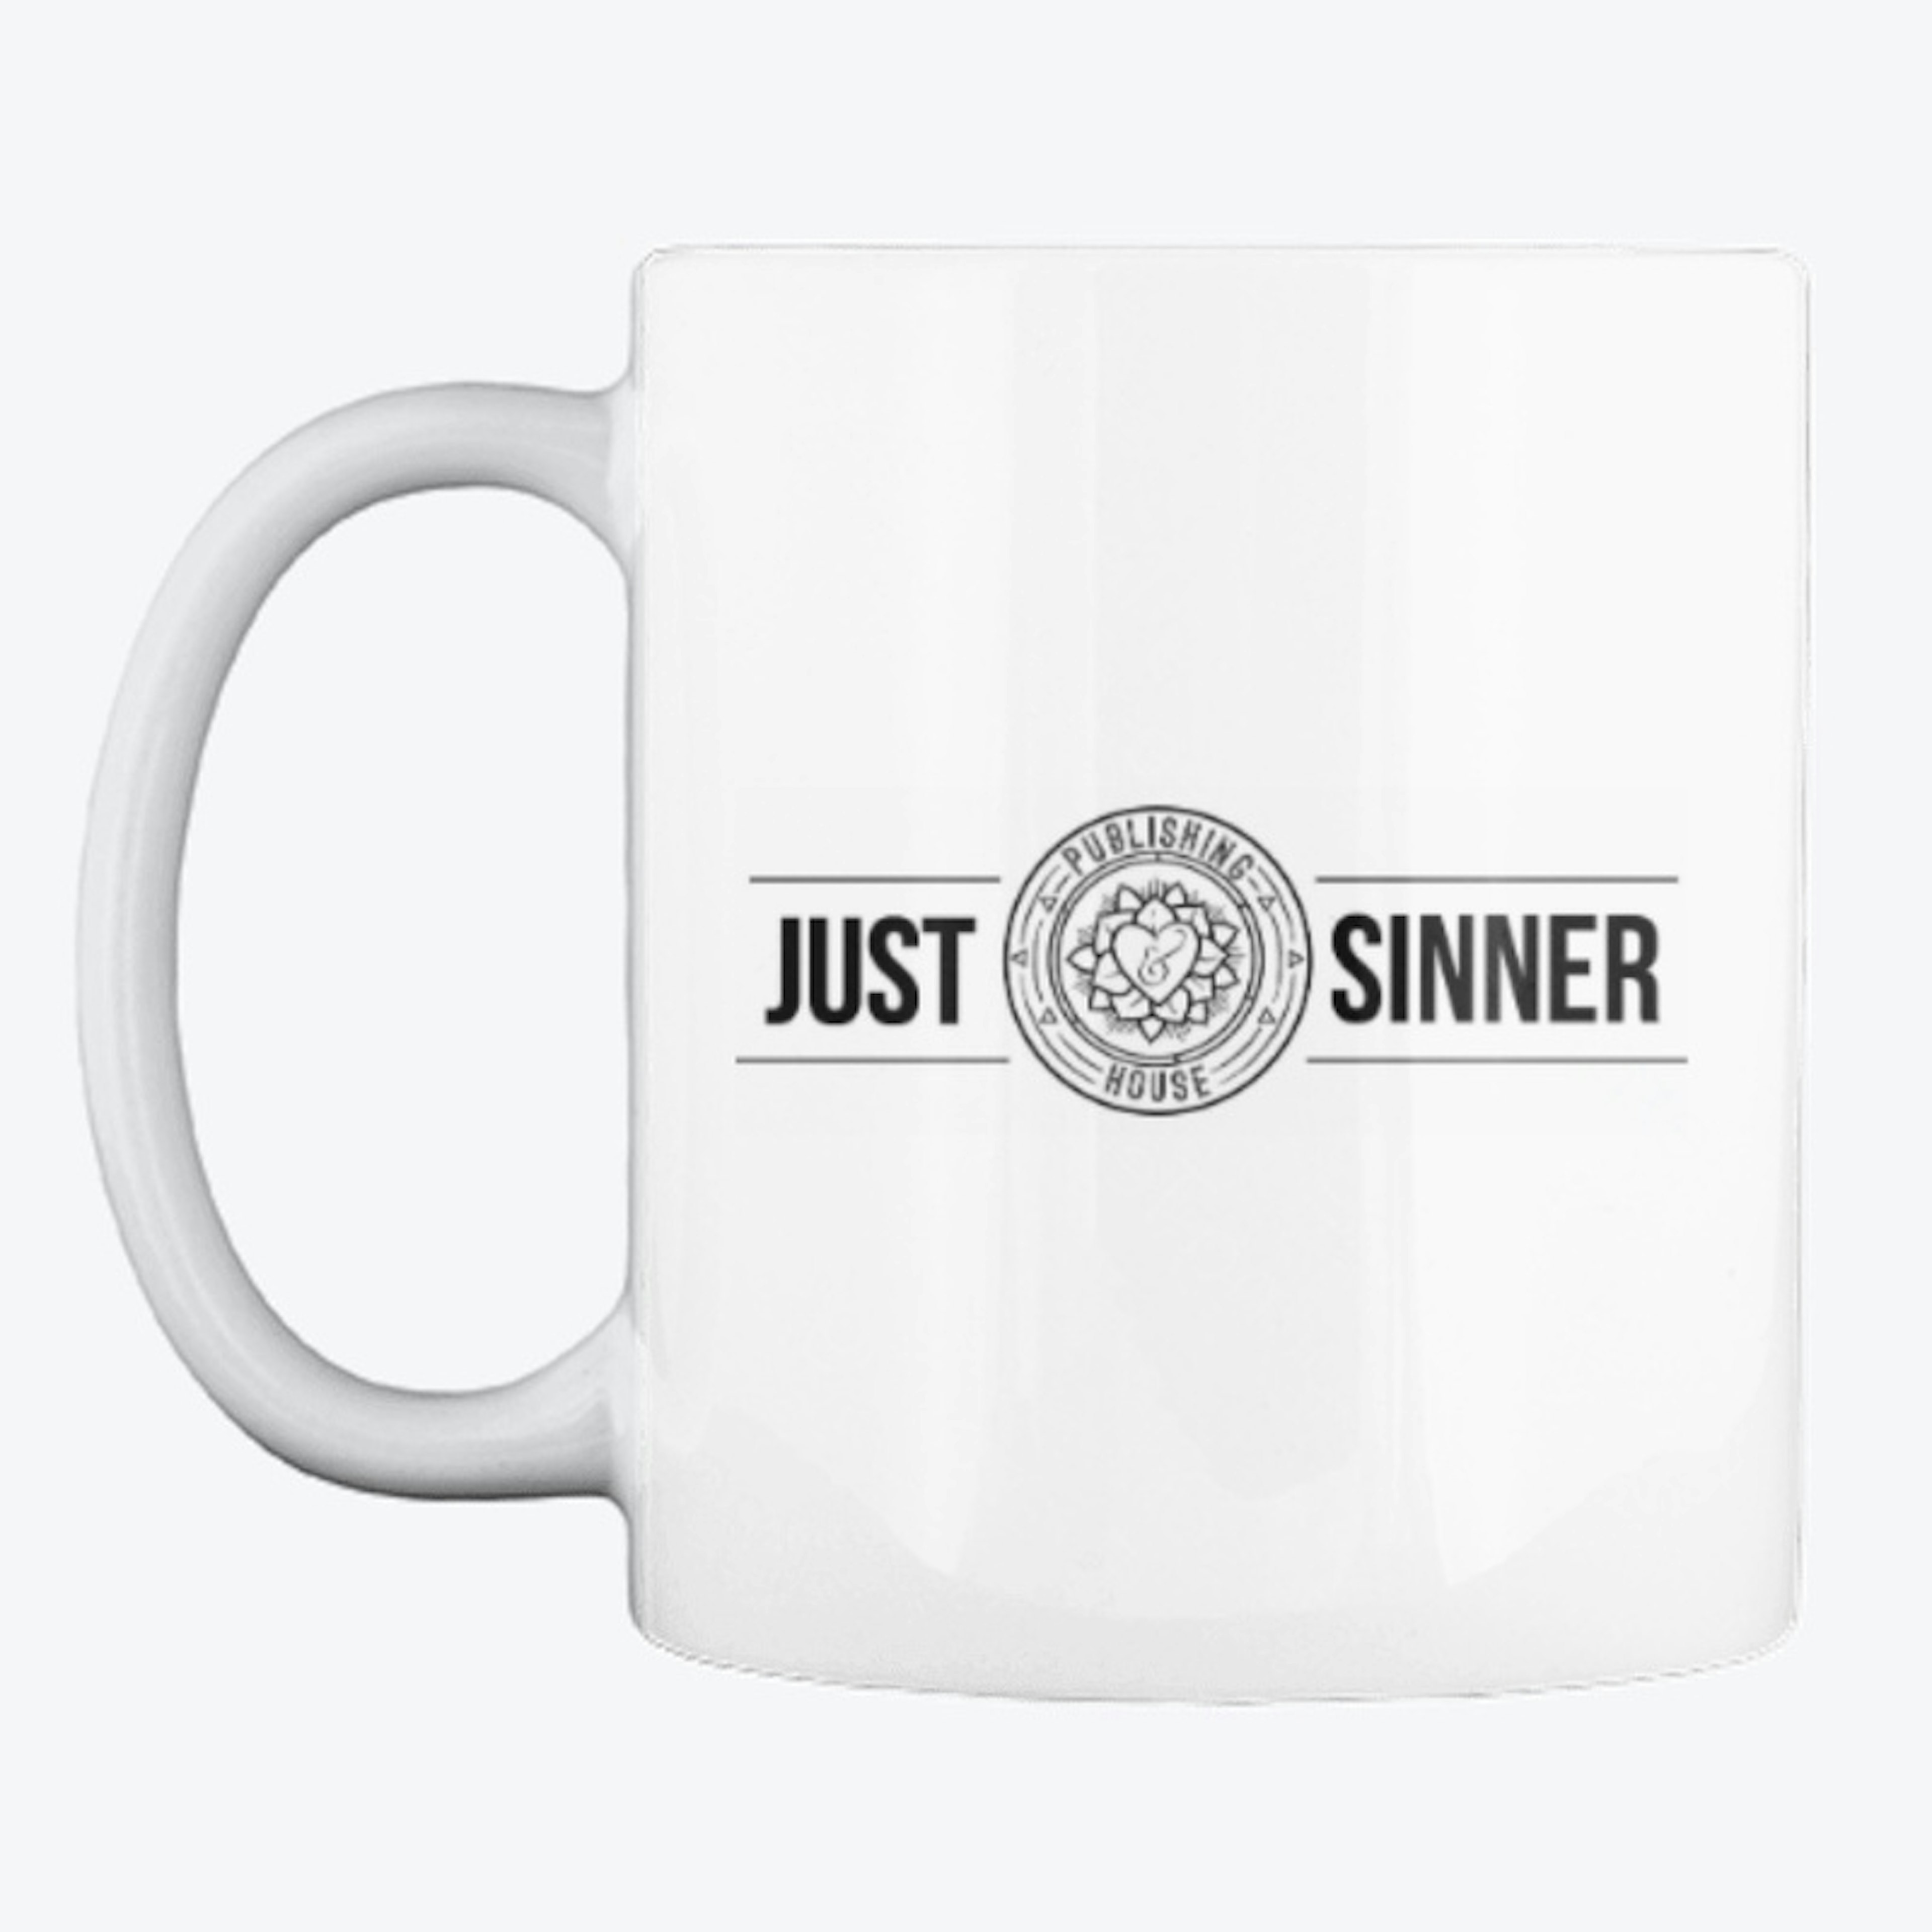 Just and Sinner Publishing